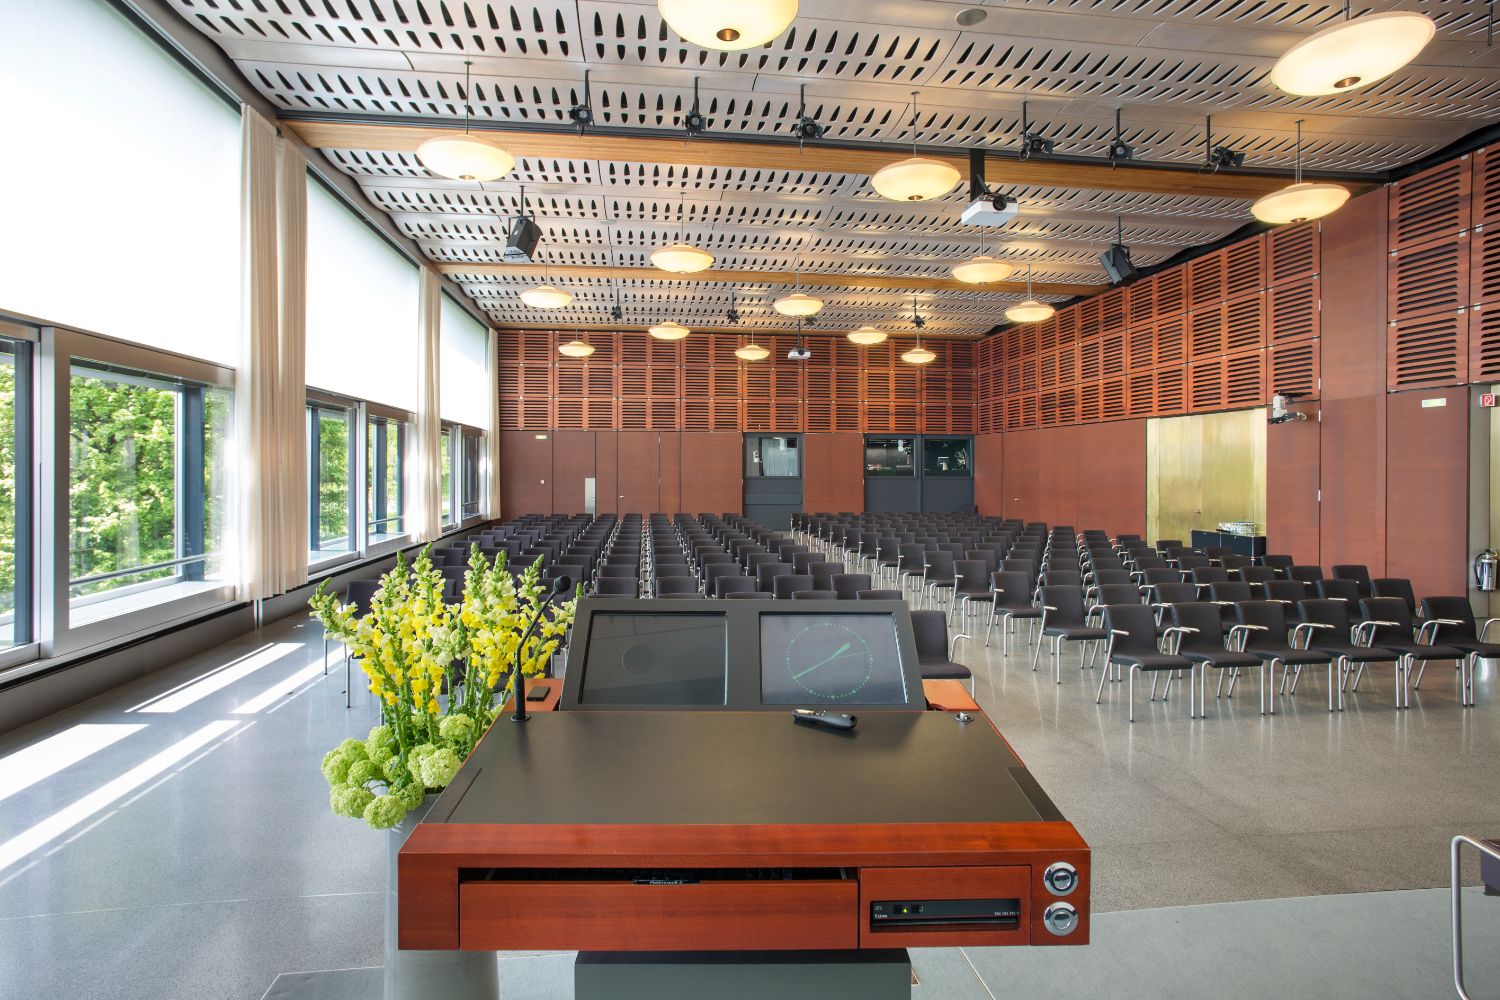 Rows of chairs and lectern in bright and airy conference room.